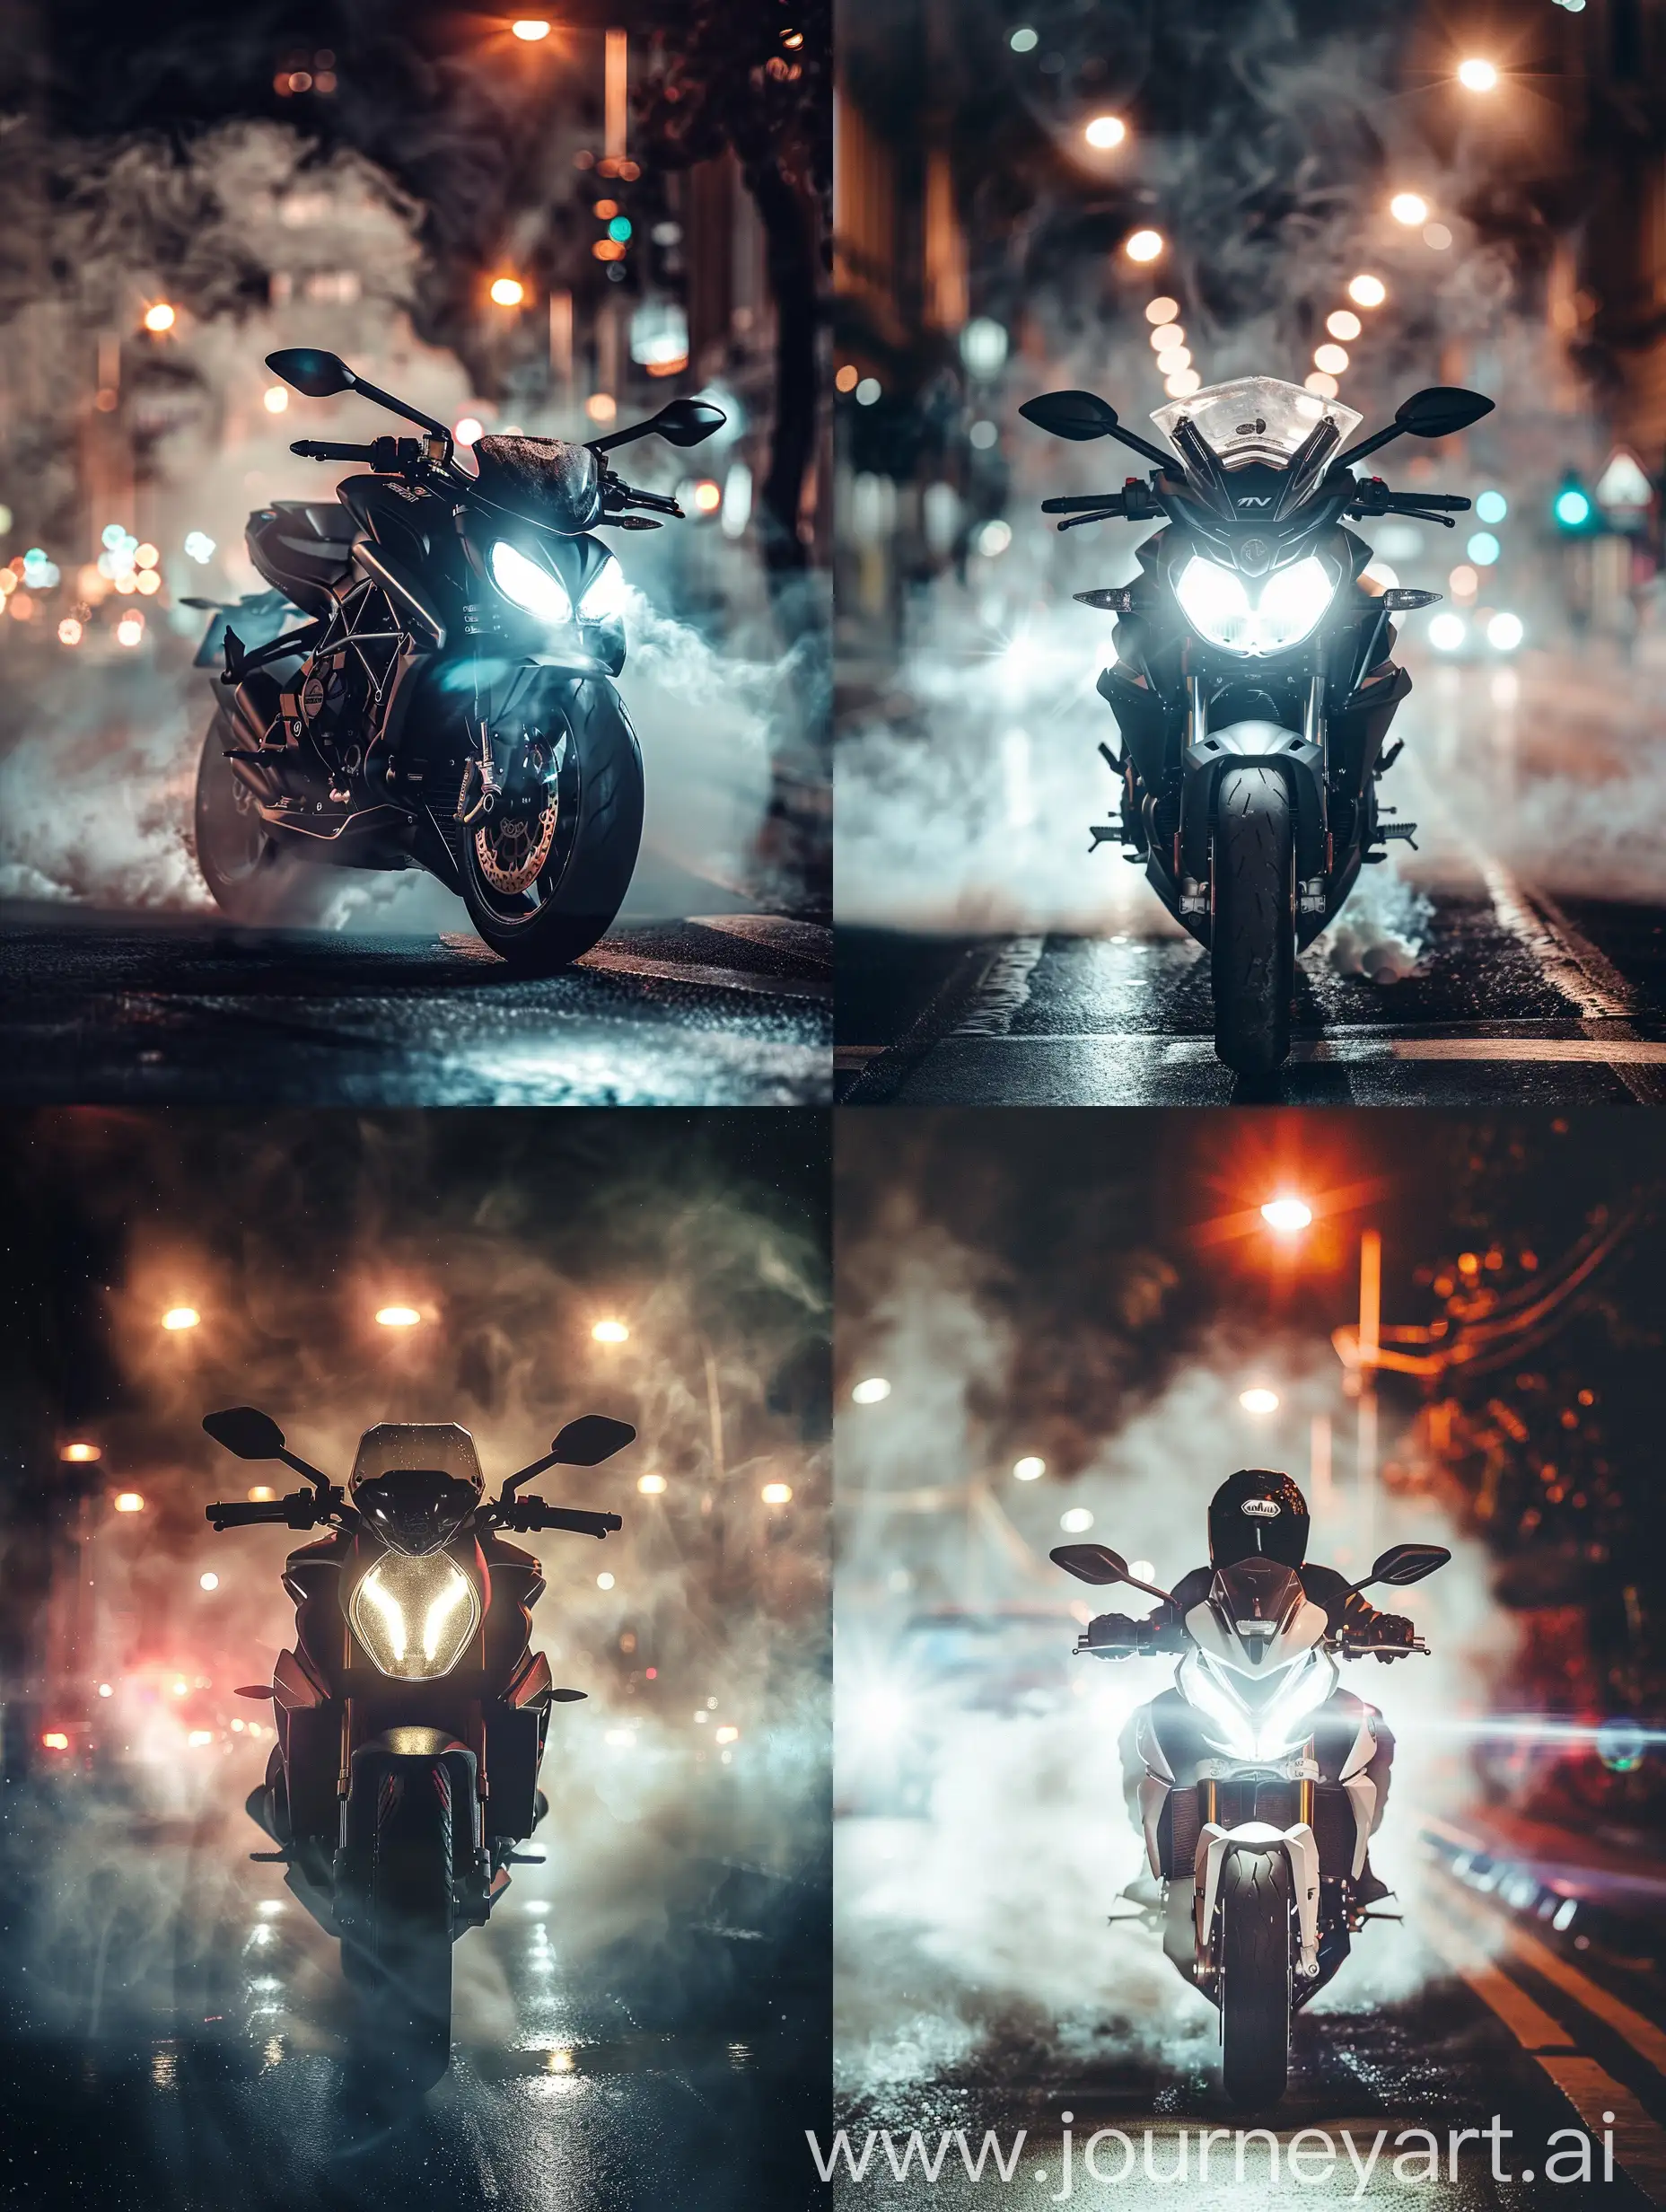 Nighttime-High-Speed-Motion-Capture-of-MV-Agusta-Headlights-and-Long-Exposure-Lights-with-Magazine-LUT